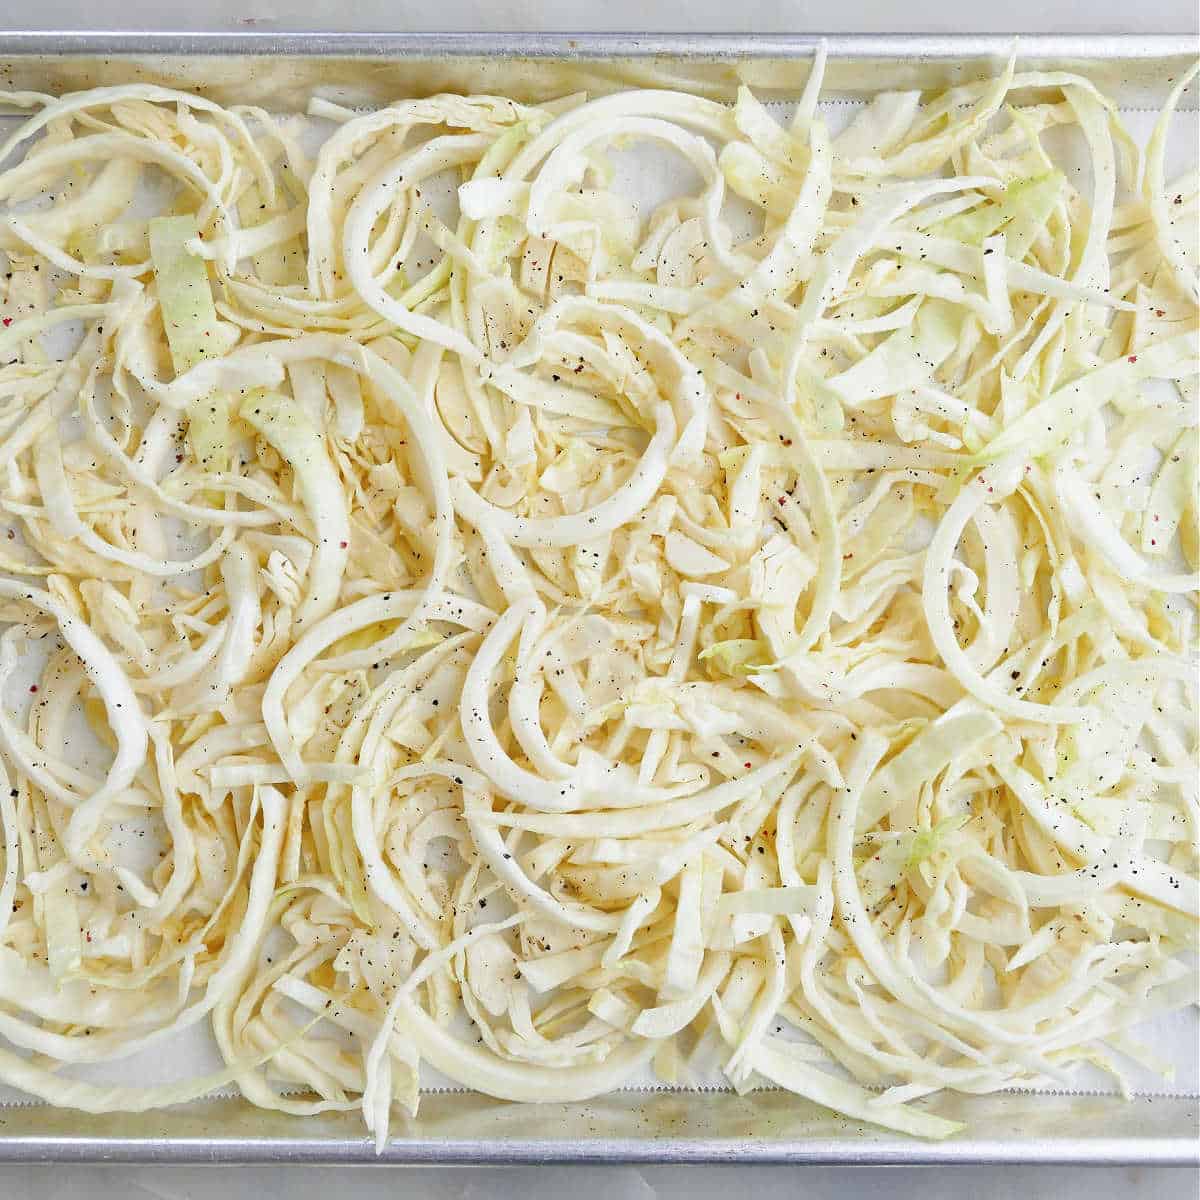 Shredded cabbage on a baking sheet.